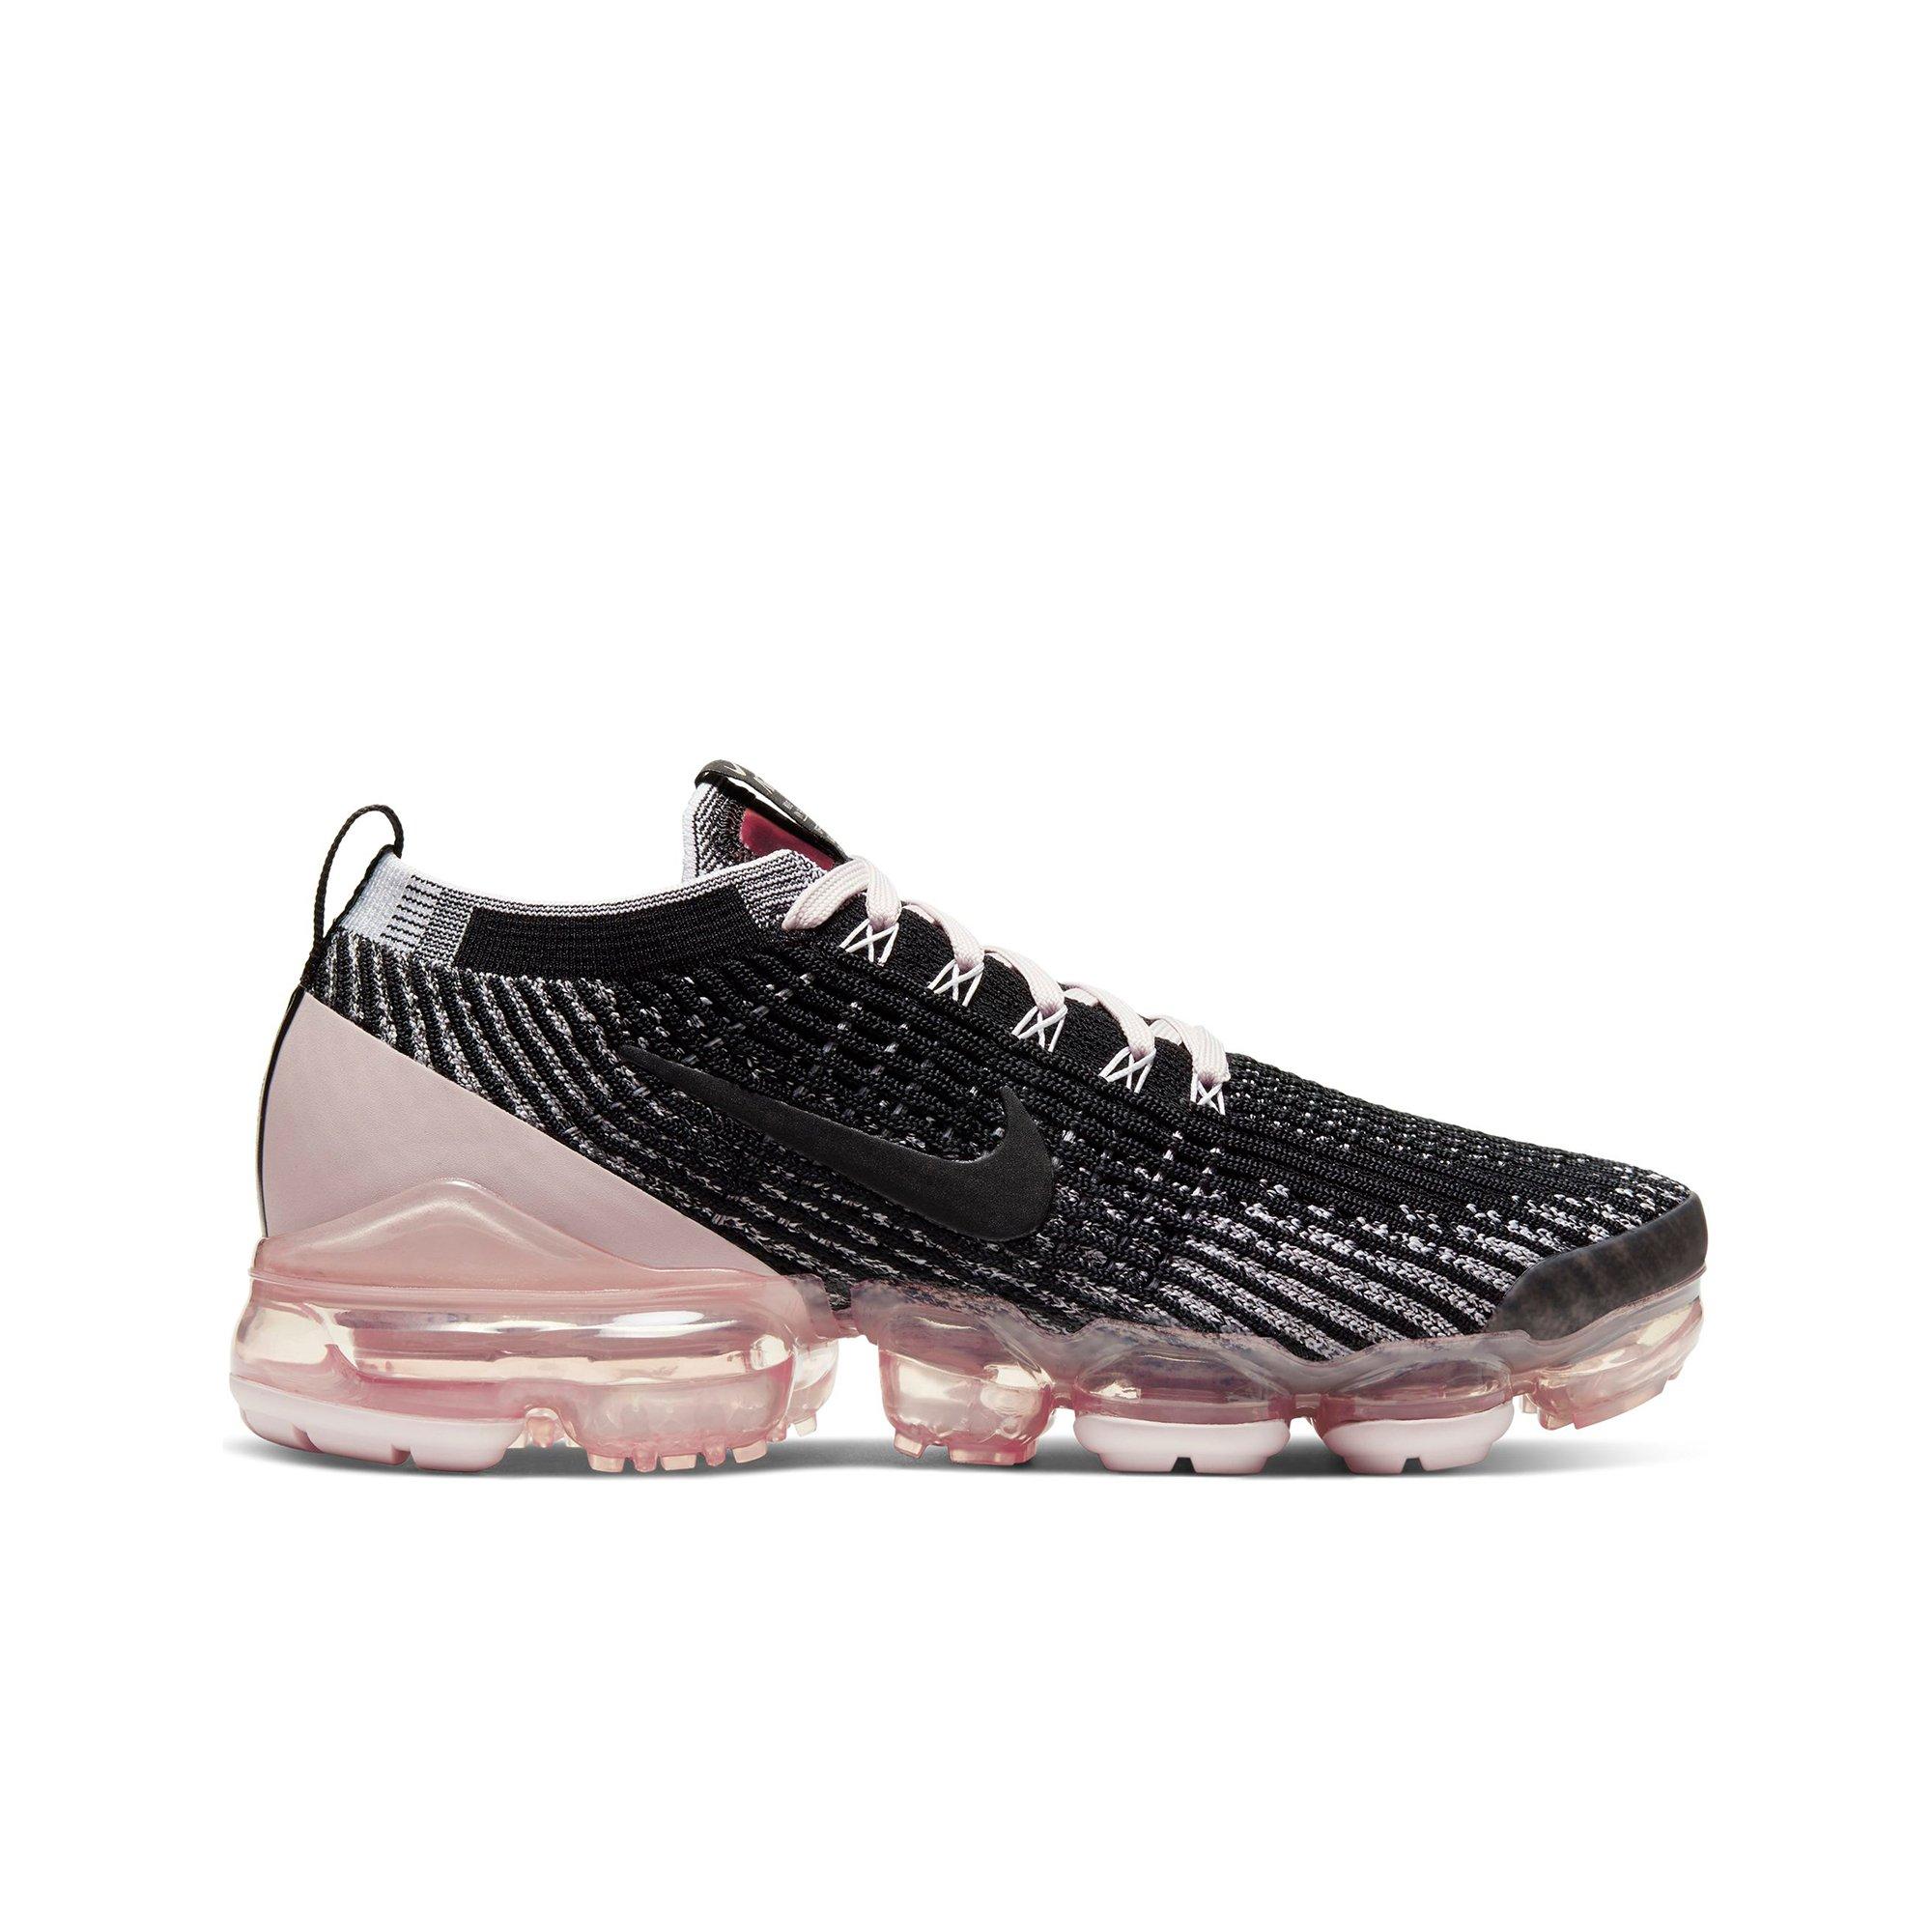 nike vapormax pink and white